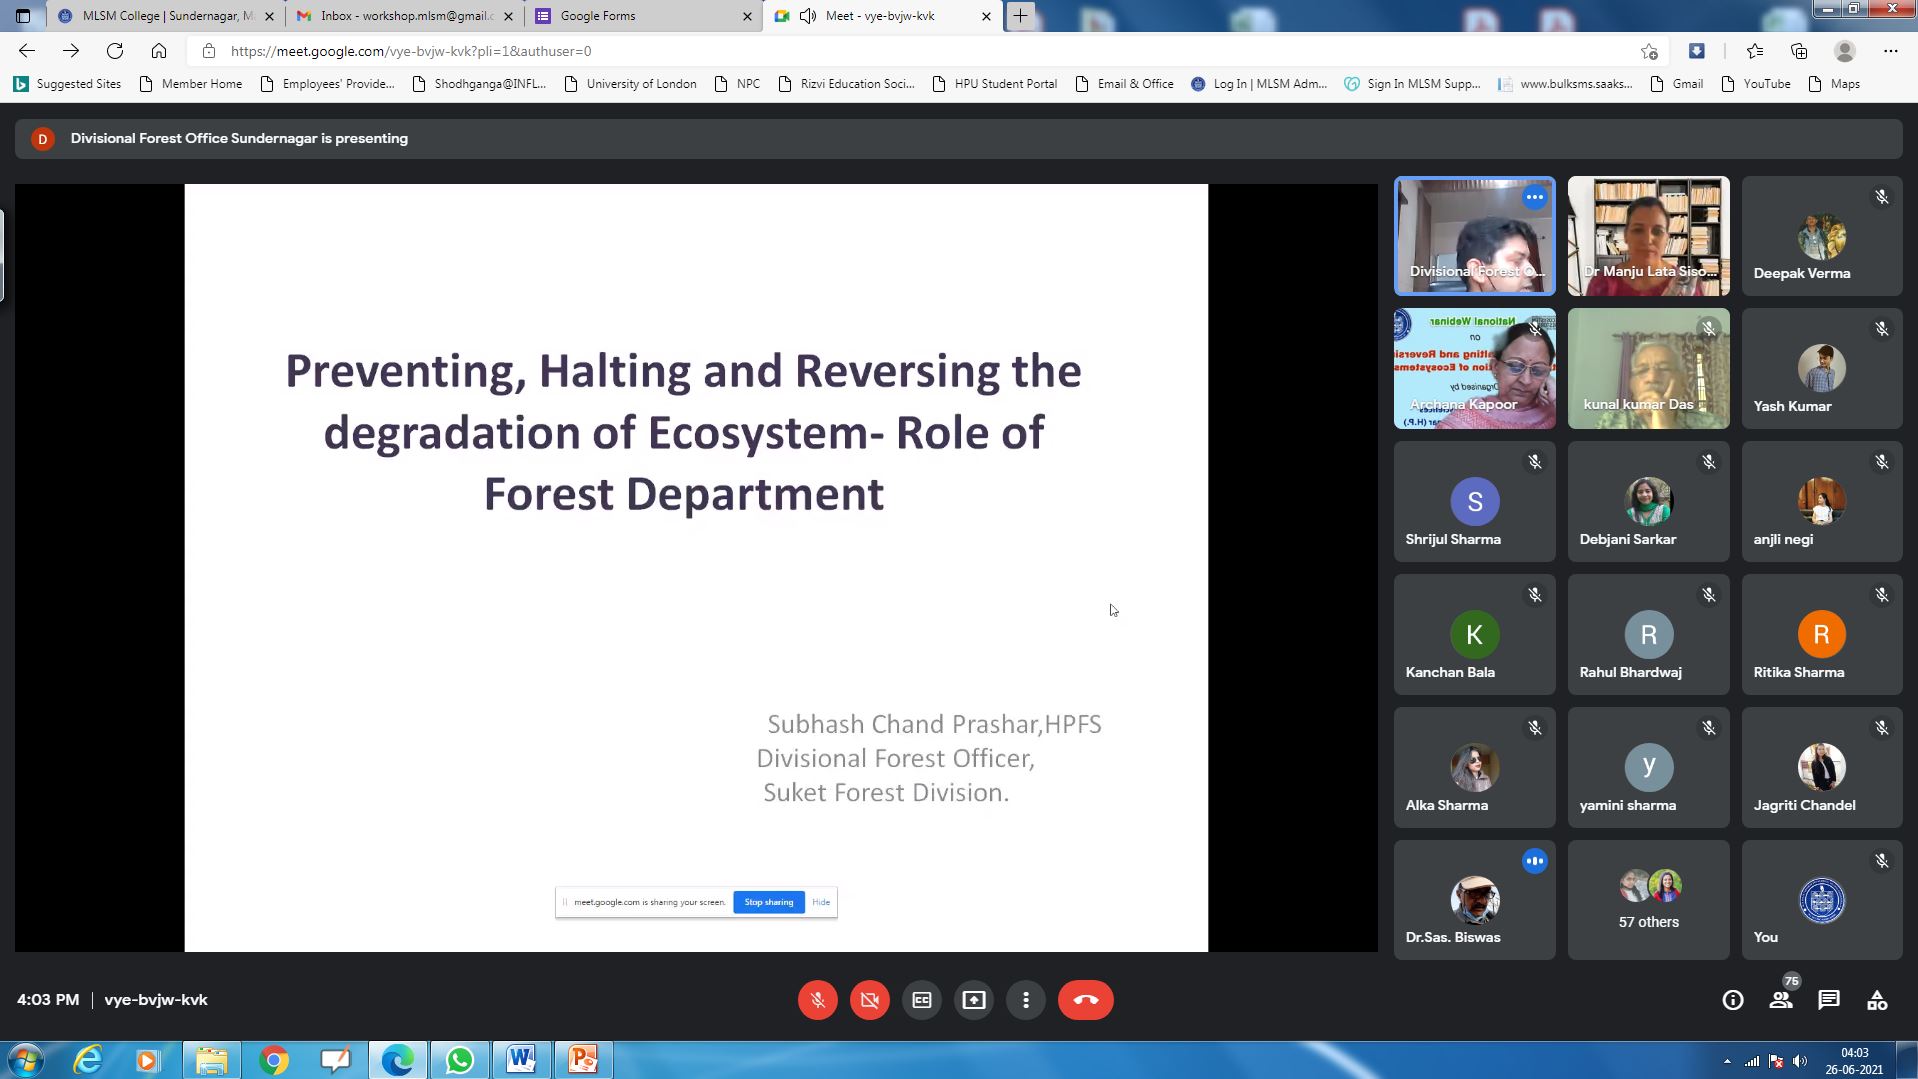 National webinar on Preventing, Halting, and Reversing the Degradation of Ecosystems